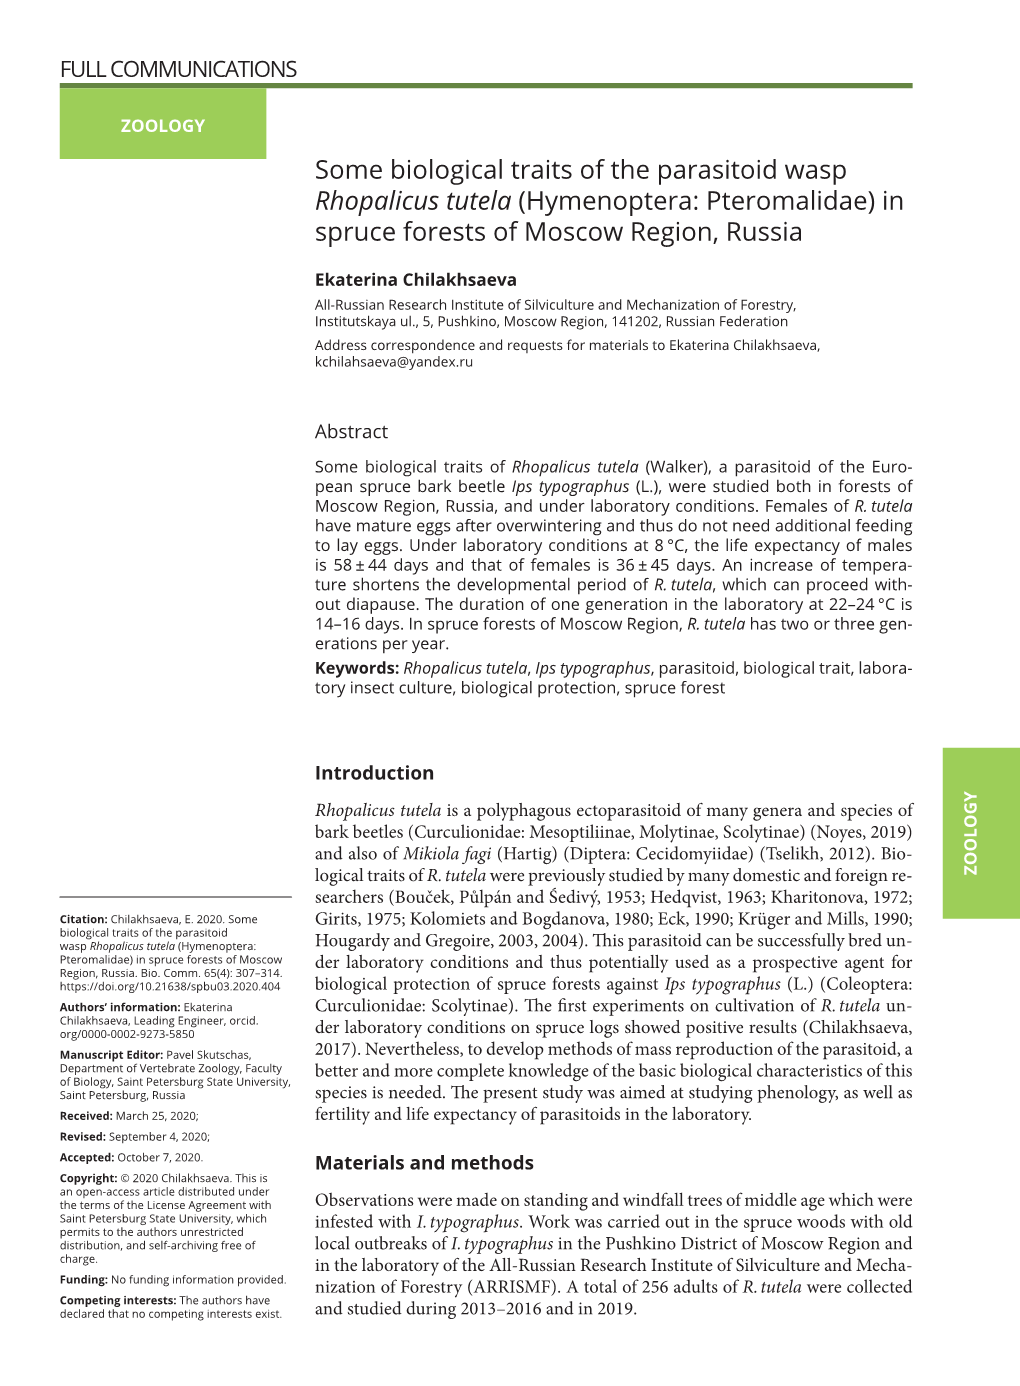 Some Biological Traits of the Parasitoid Wasp Rhopalicus Tutela (Hymenoptera: Pteromalidae) in Spruce Forests of Moscow Region, Russia